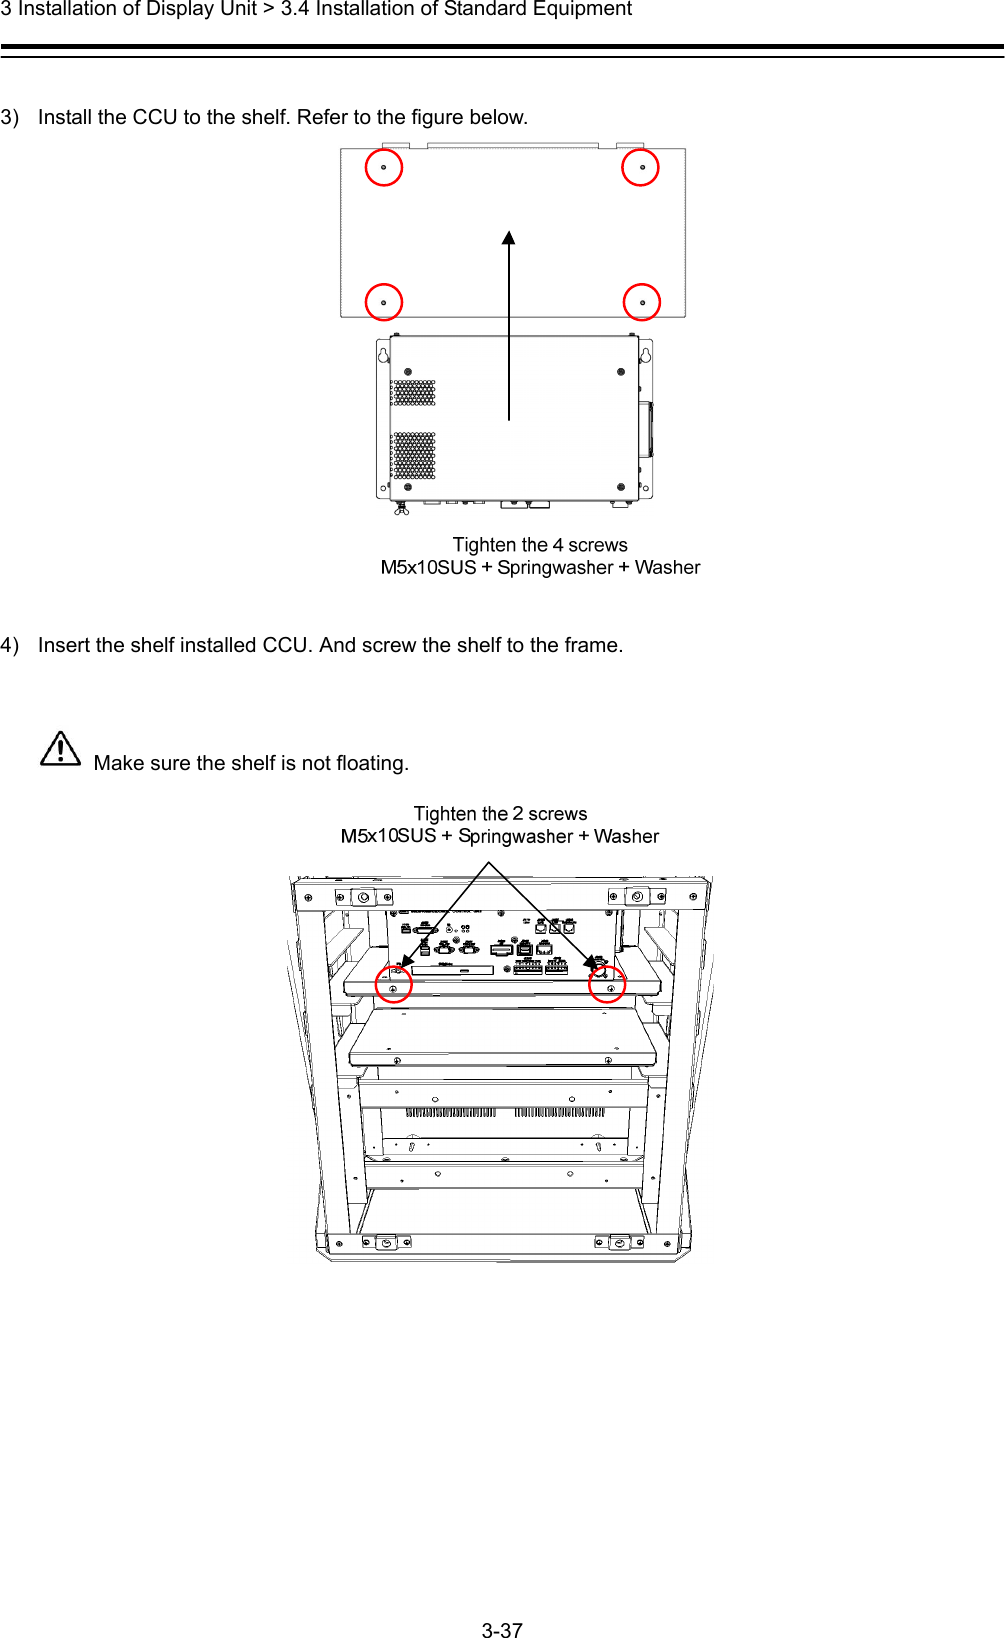  3 Installation of Display Unit &gt; 3.4 Installation of Standard Equipment 3-37   3)  Install the CCU to the shelf. Refer to the figure below.   4)  Insert the shelf installed CCU. And screw the shelf to the frame.    Make sure the shelf is not floating.  